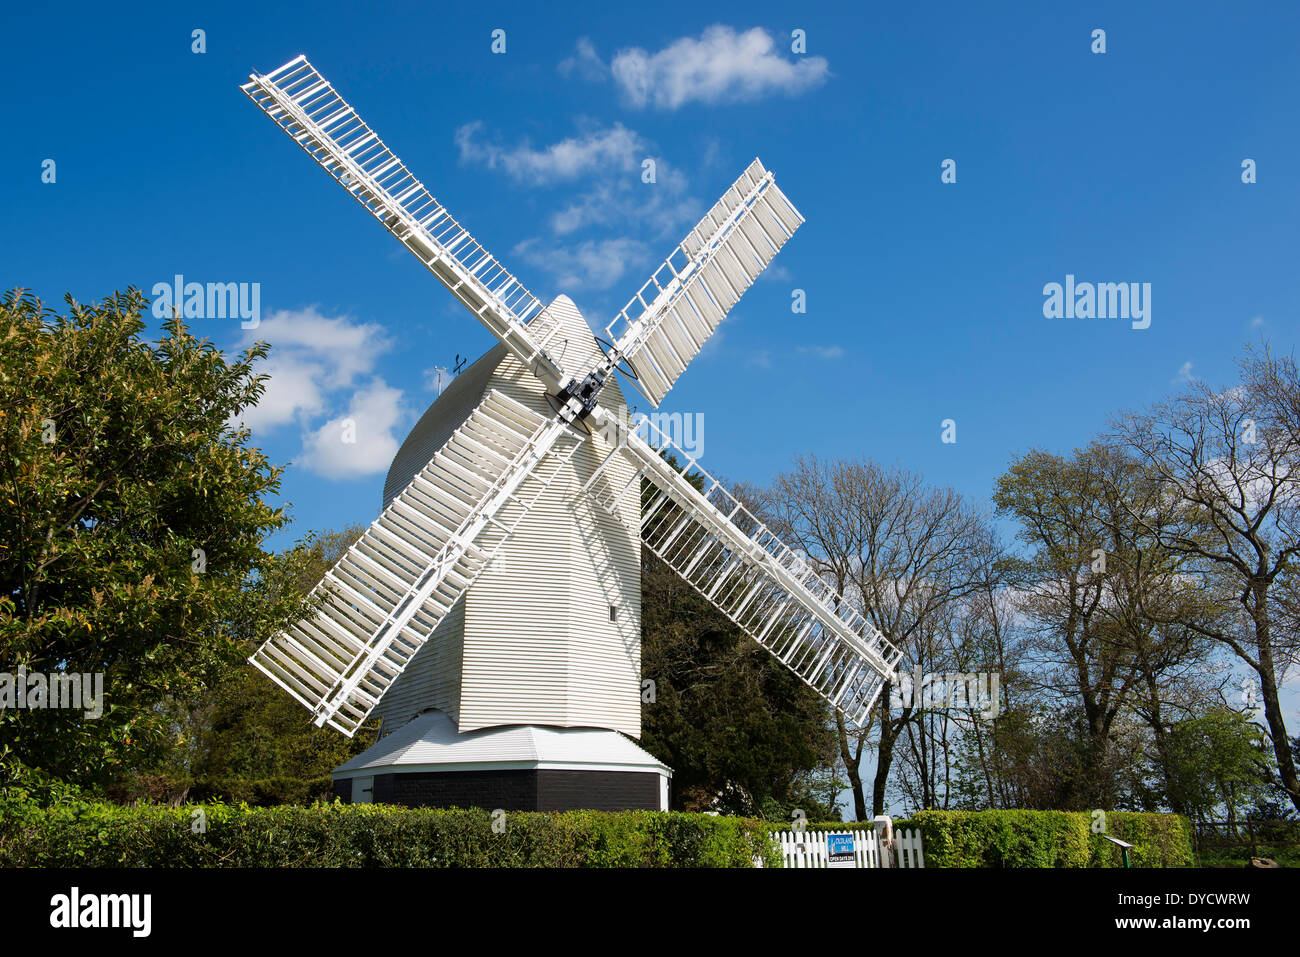 Oldland windmill, an example of a post mill, near the village of Keymer in West Sussex, UK Stock Photo